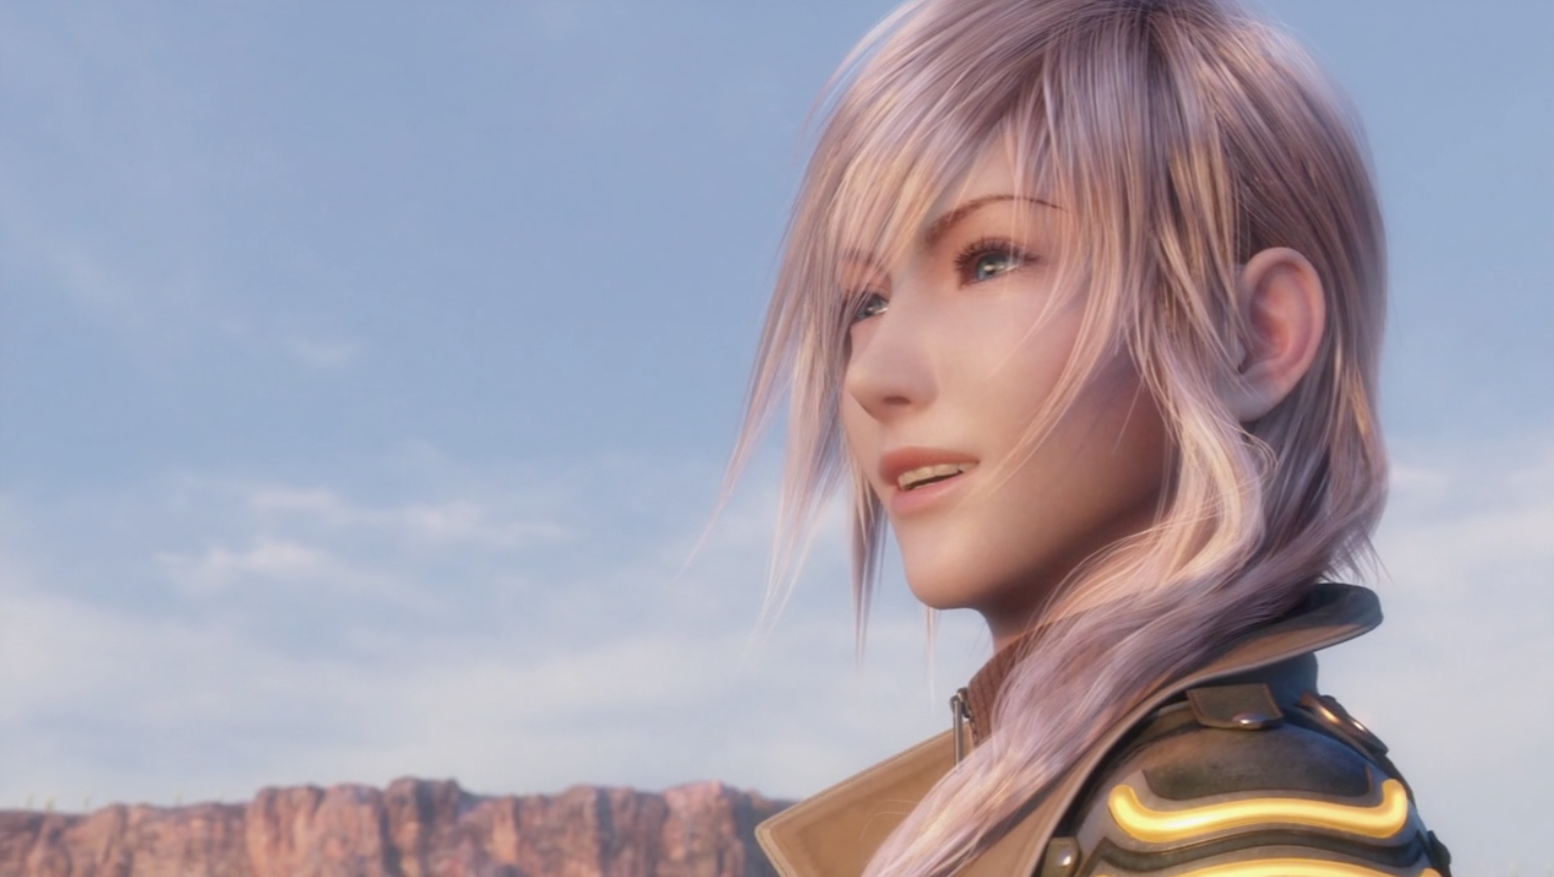 Final Fantasy XIII-2: Cancelled Environments, Areas and DLC Plans